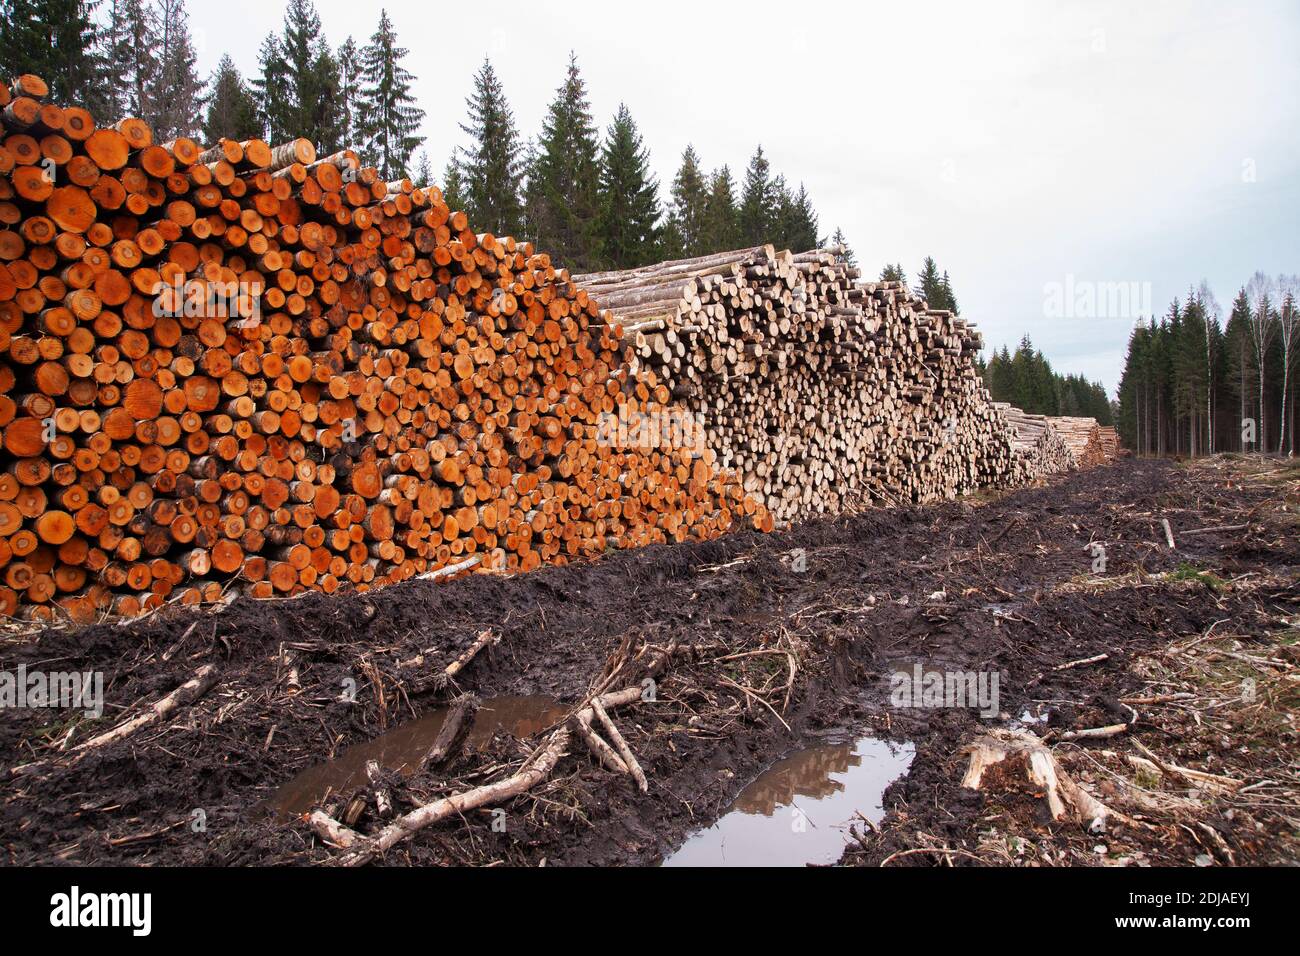 Freshly cut and piled lumber as a raw material resource for wood industry in Estonia. Stock Photo